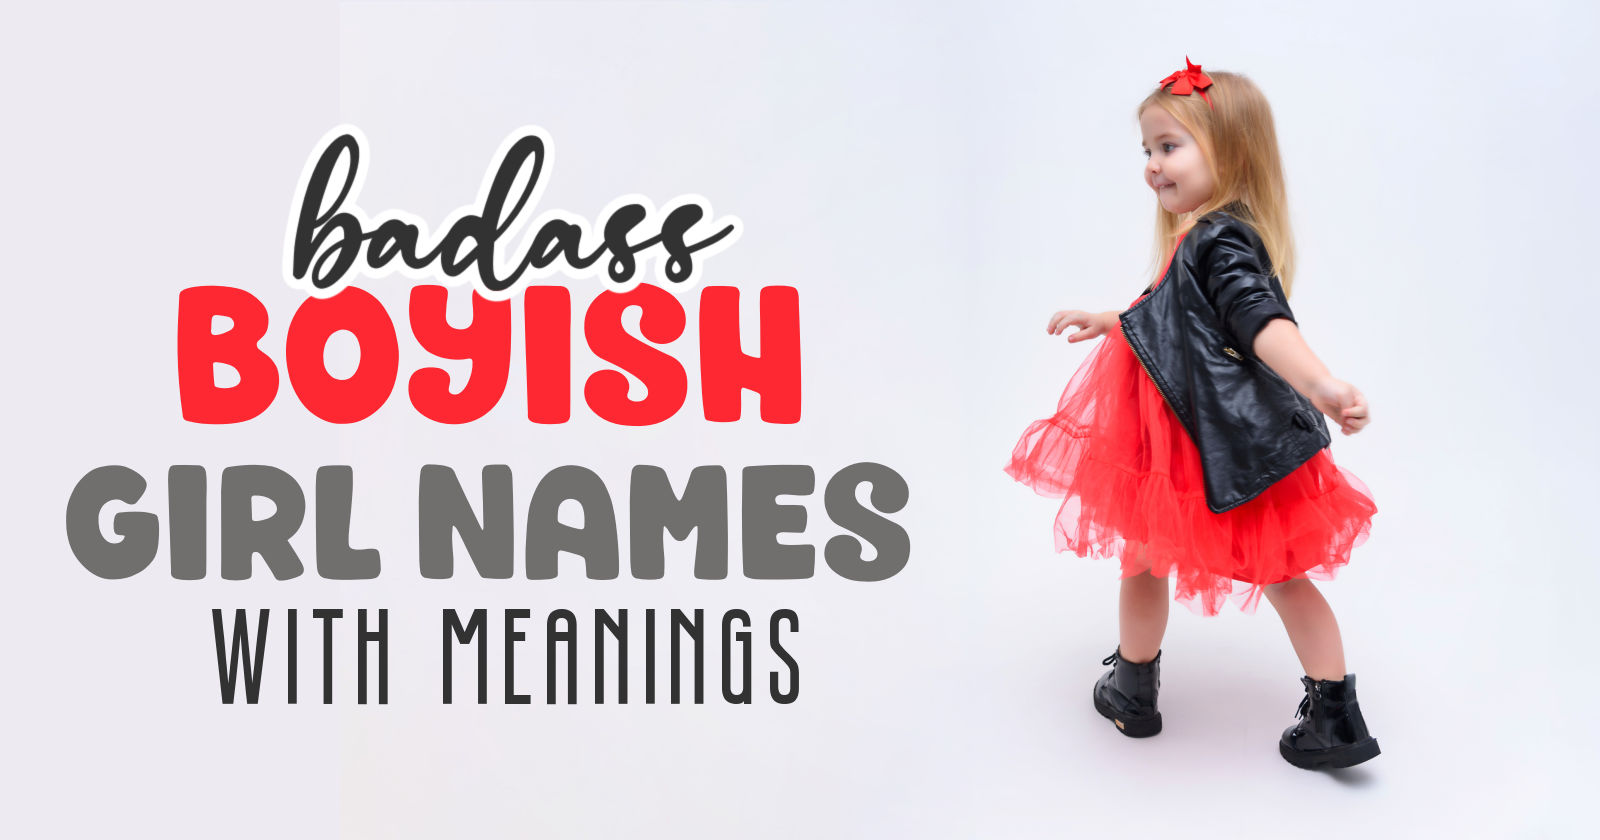 cute litte girl in leather jacket and dress walking and title badass boyish girl names with meanings